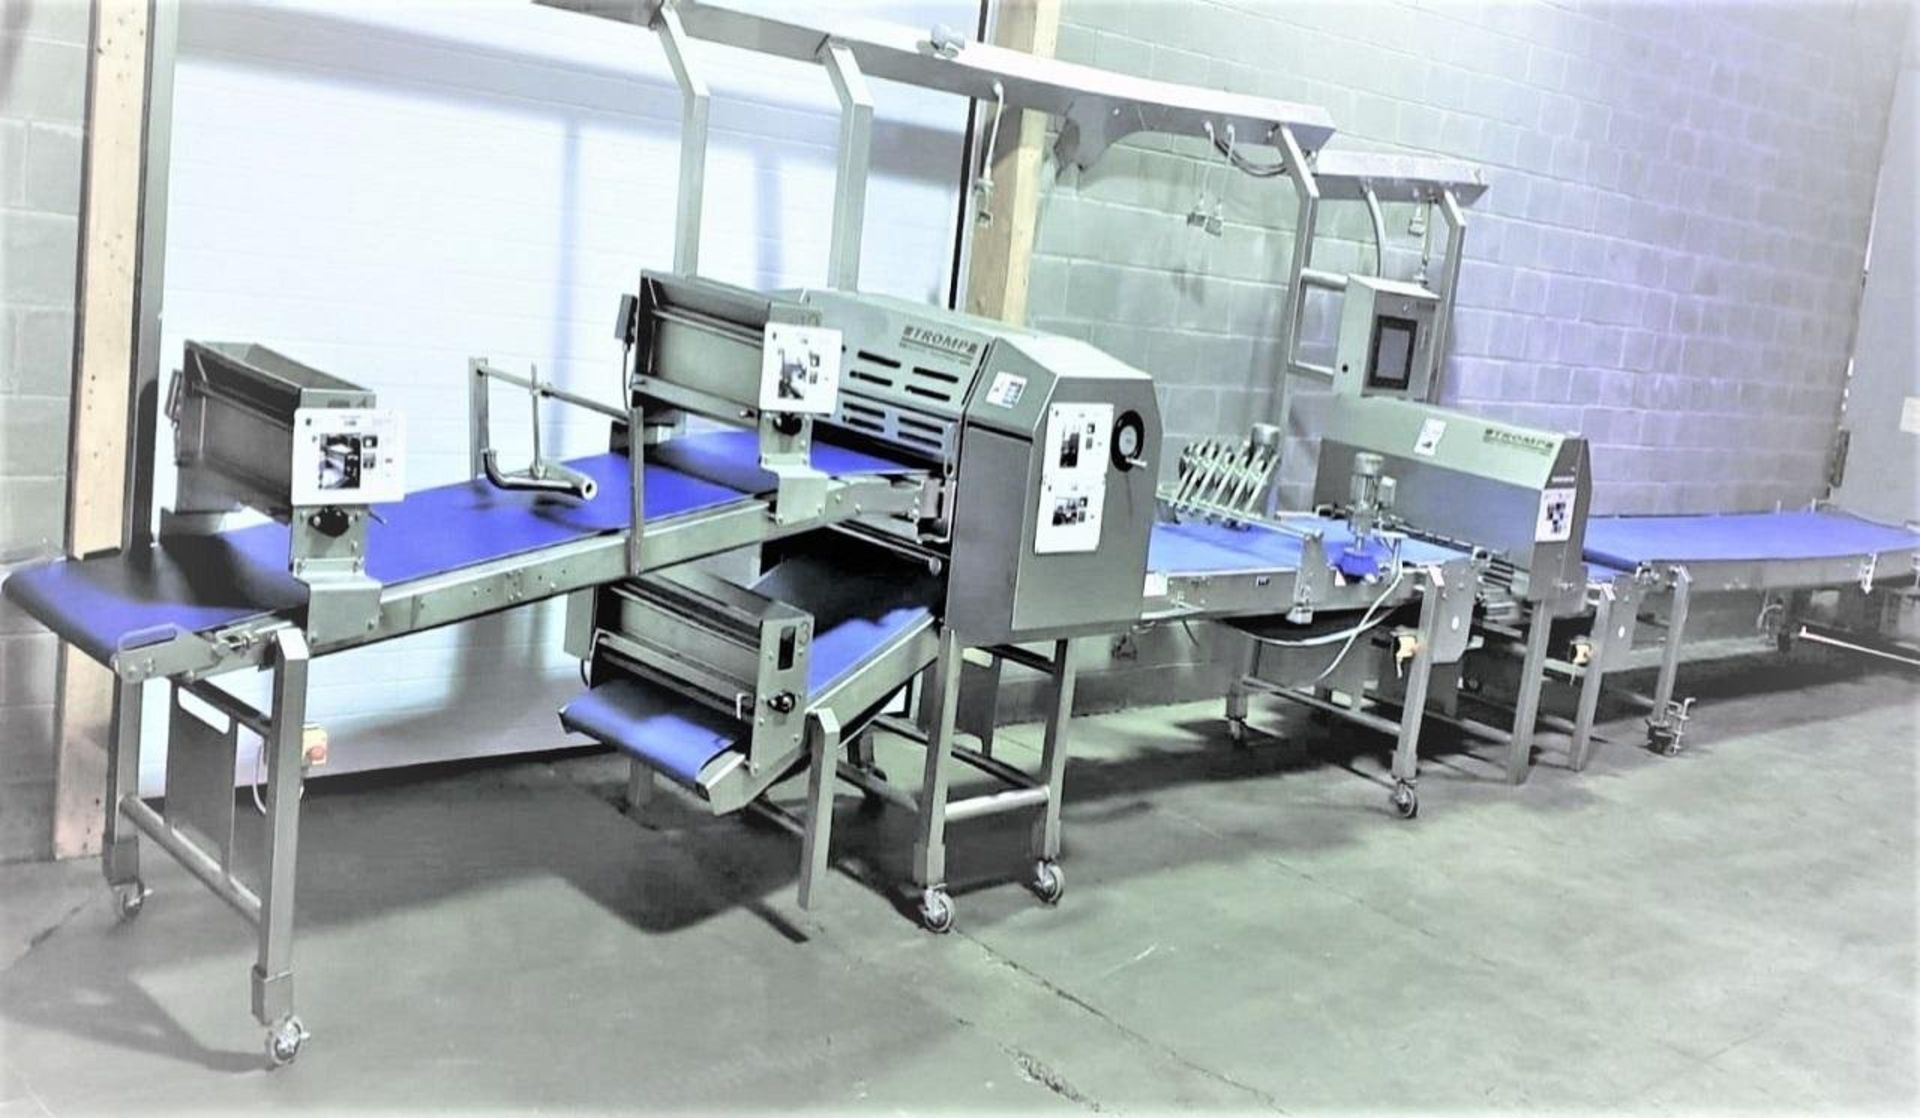 Tromp Bakery Line multi-purpose S/S Combines Dough and Flour Depositin, With Roller Sheeting, Fold - Image 6 of 11